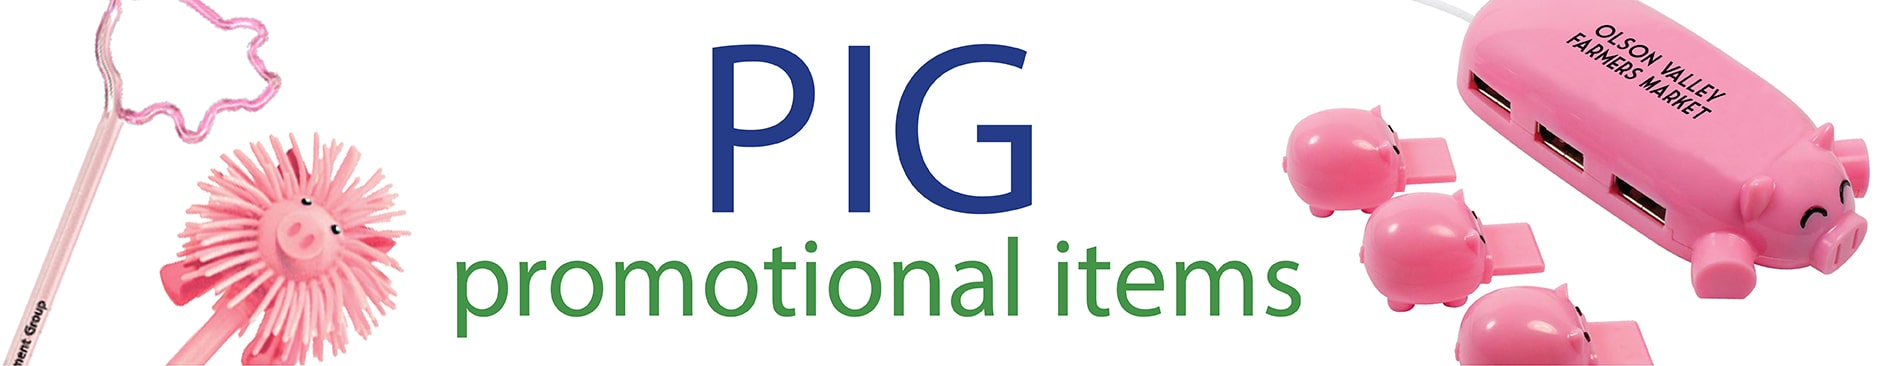 pig promotional items